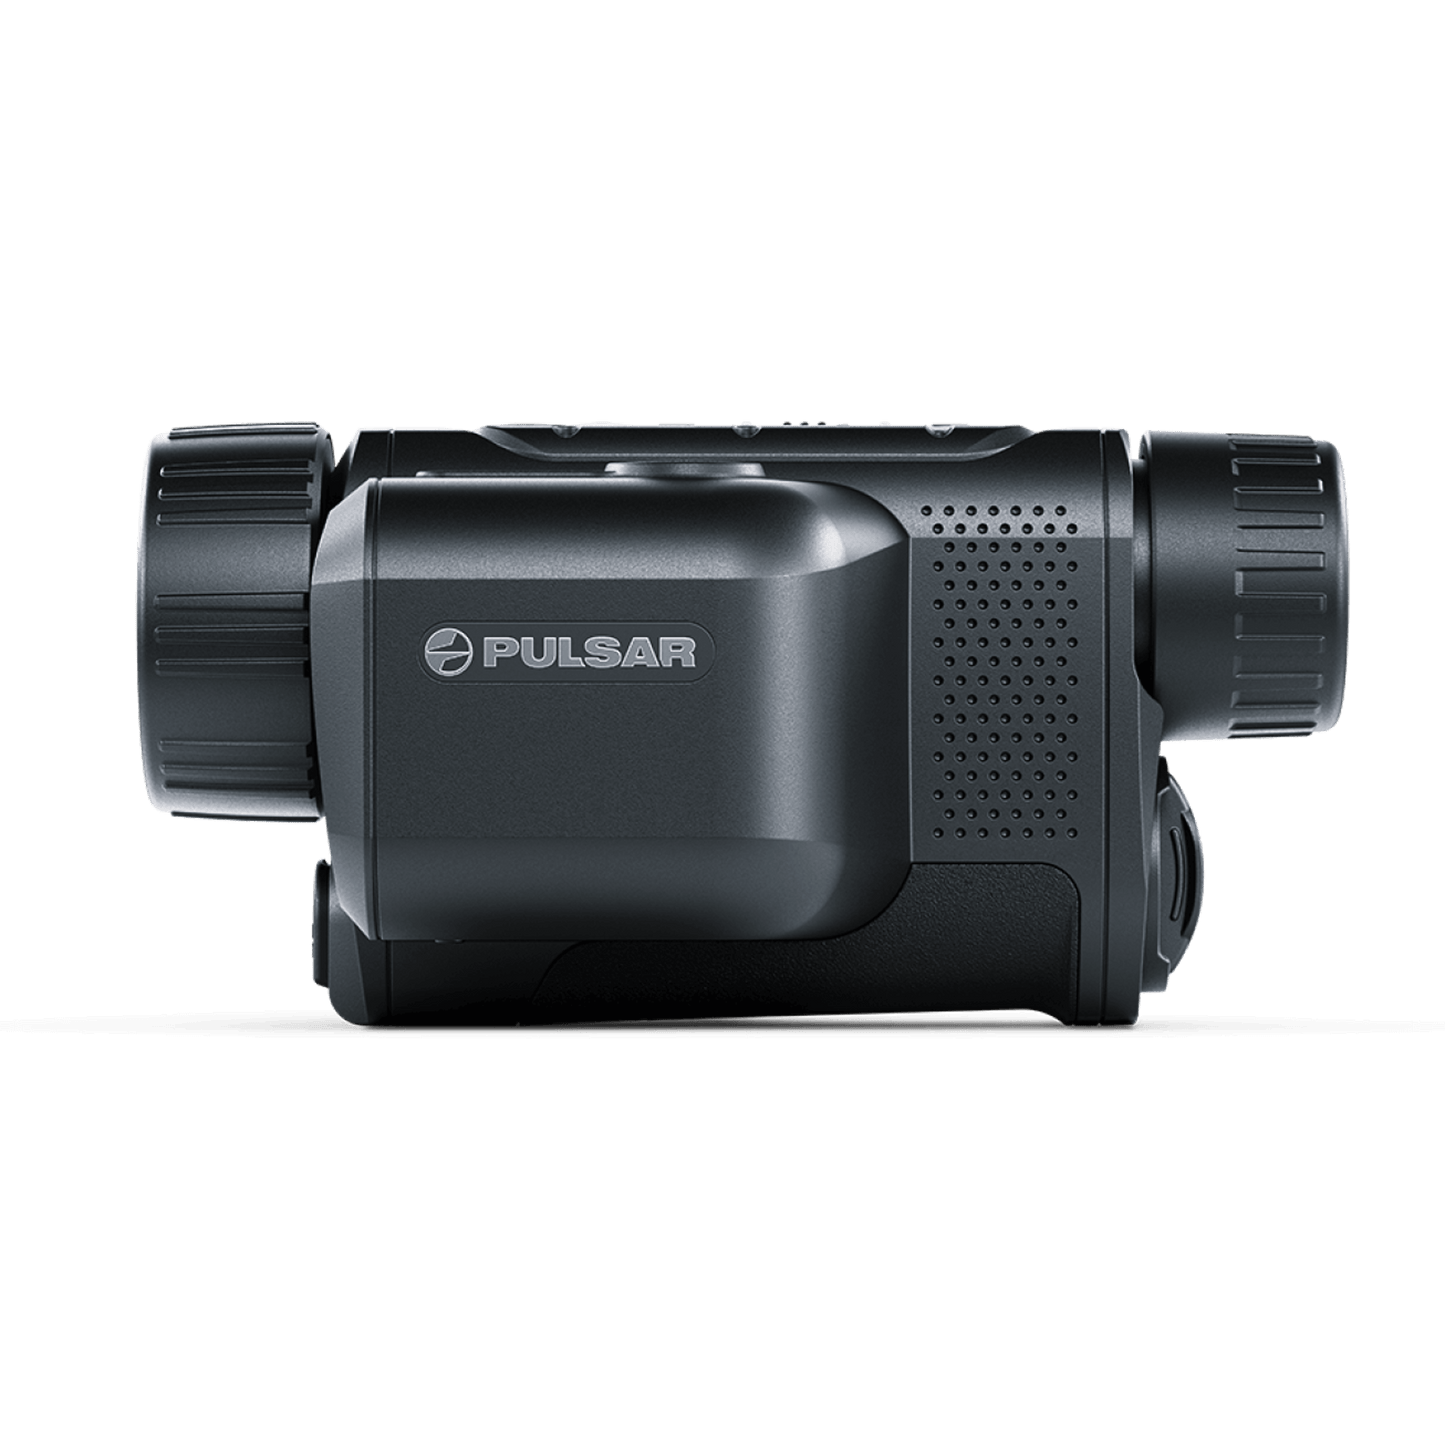 Pulsar Axion 2 XQ35 LRF Handheld Thermal Monocular for Sale with Cape Thermal Left Side View